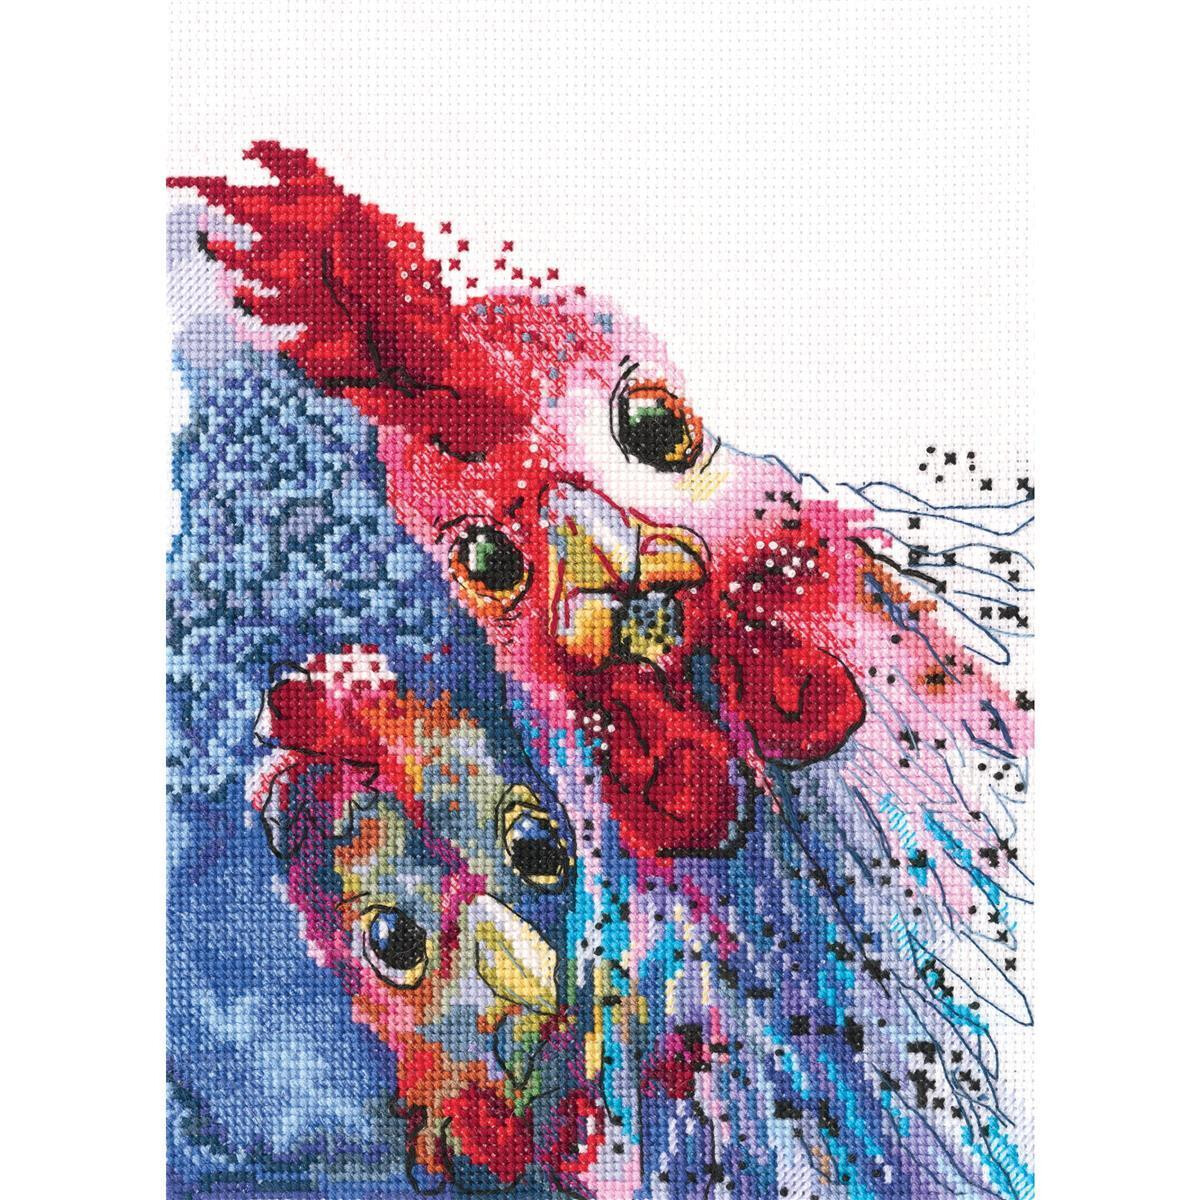 RTO counted Cross Stitch Kit "Roasted chicken with...